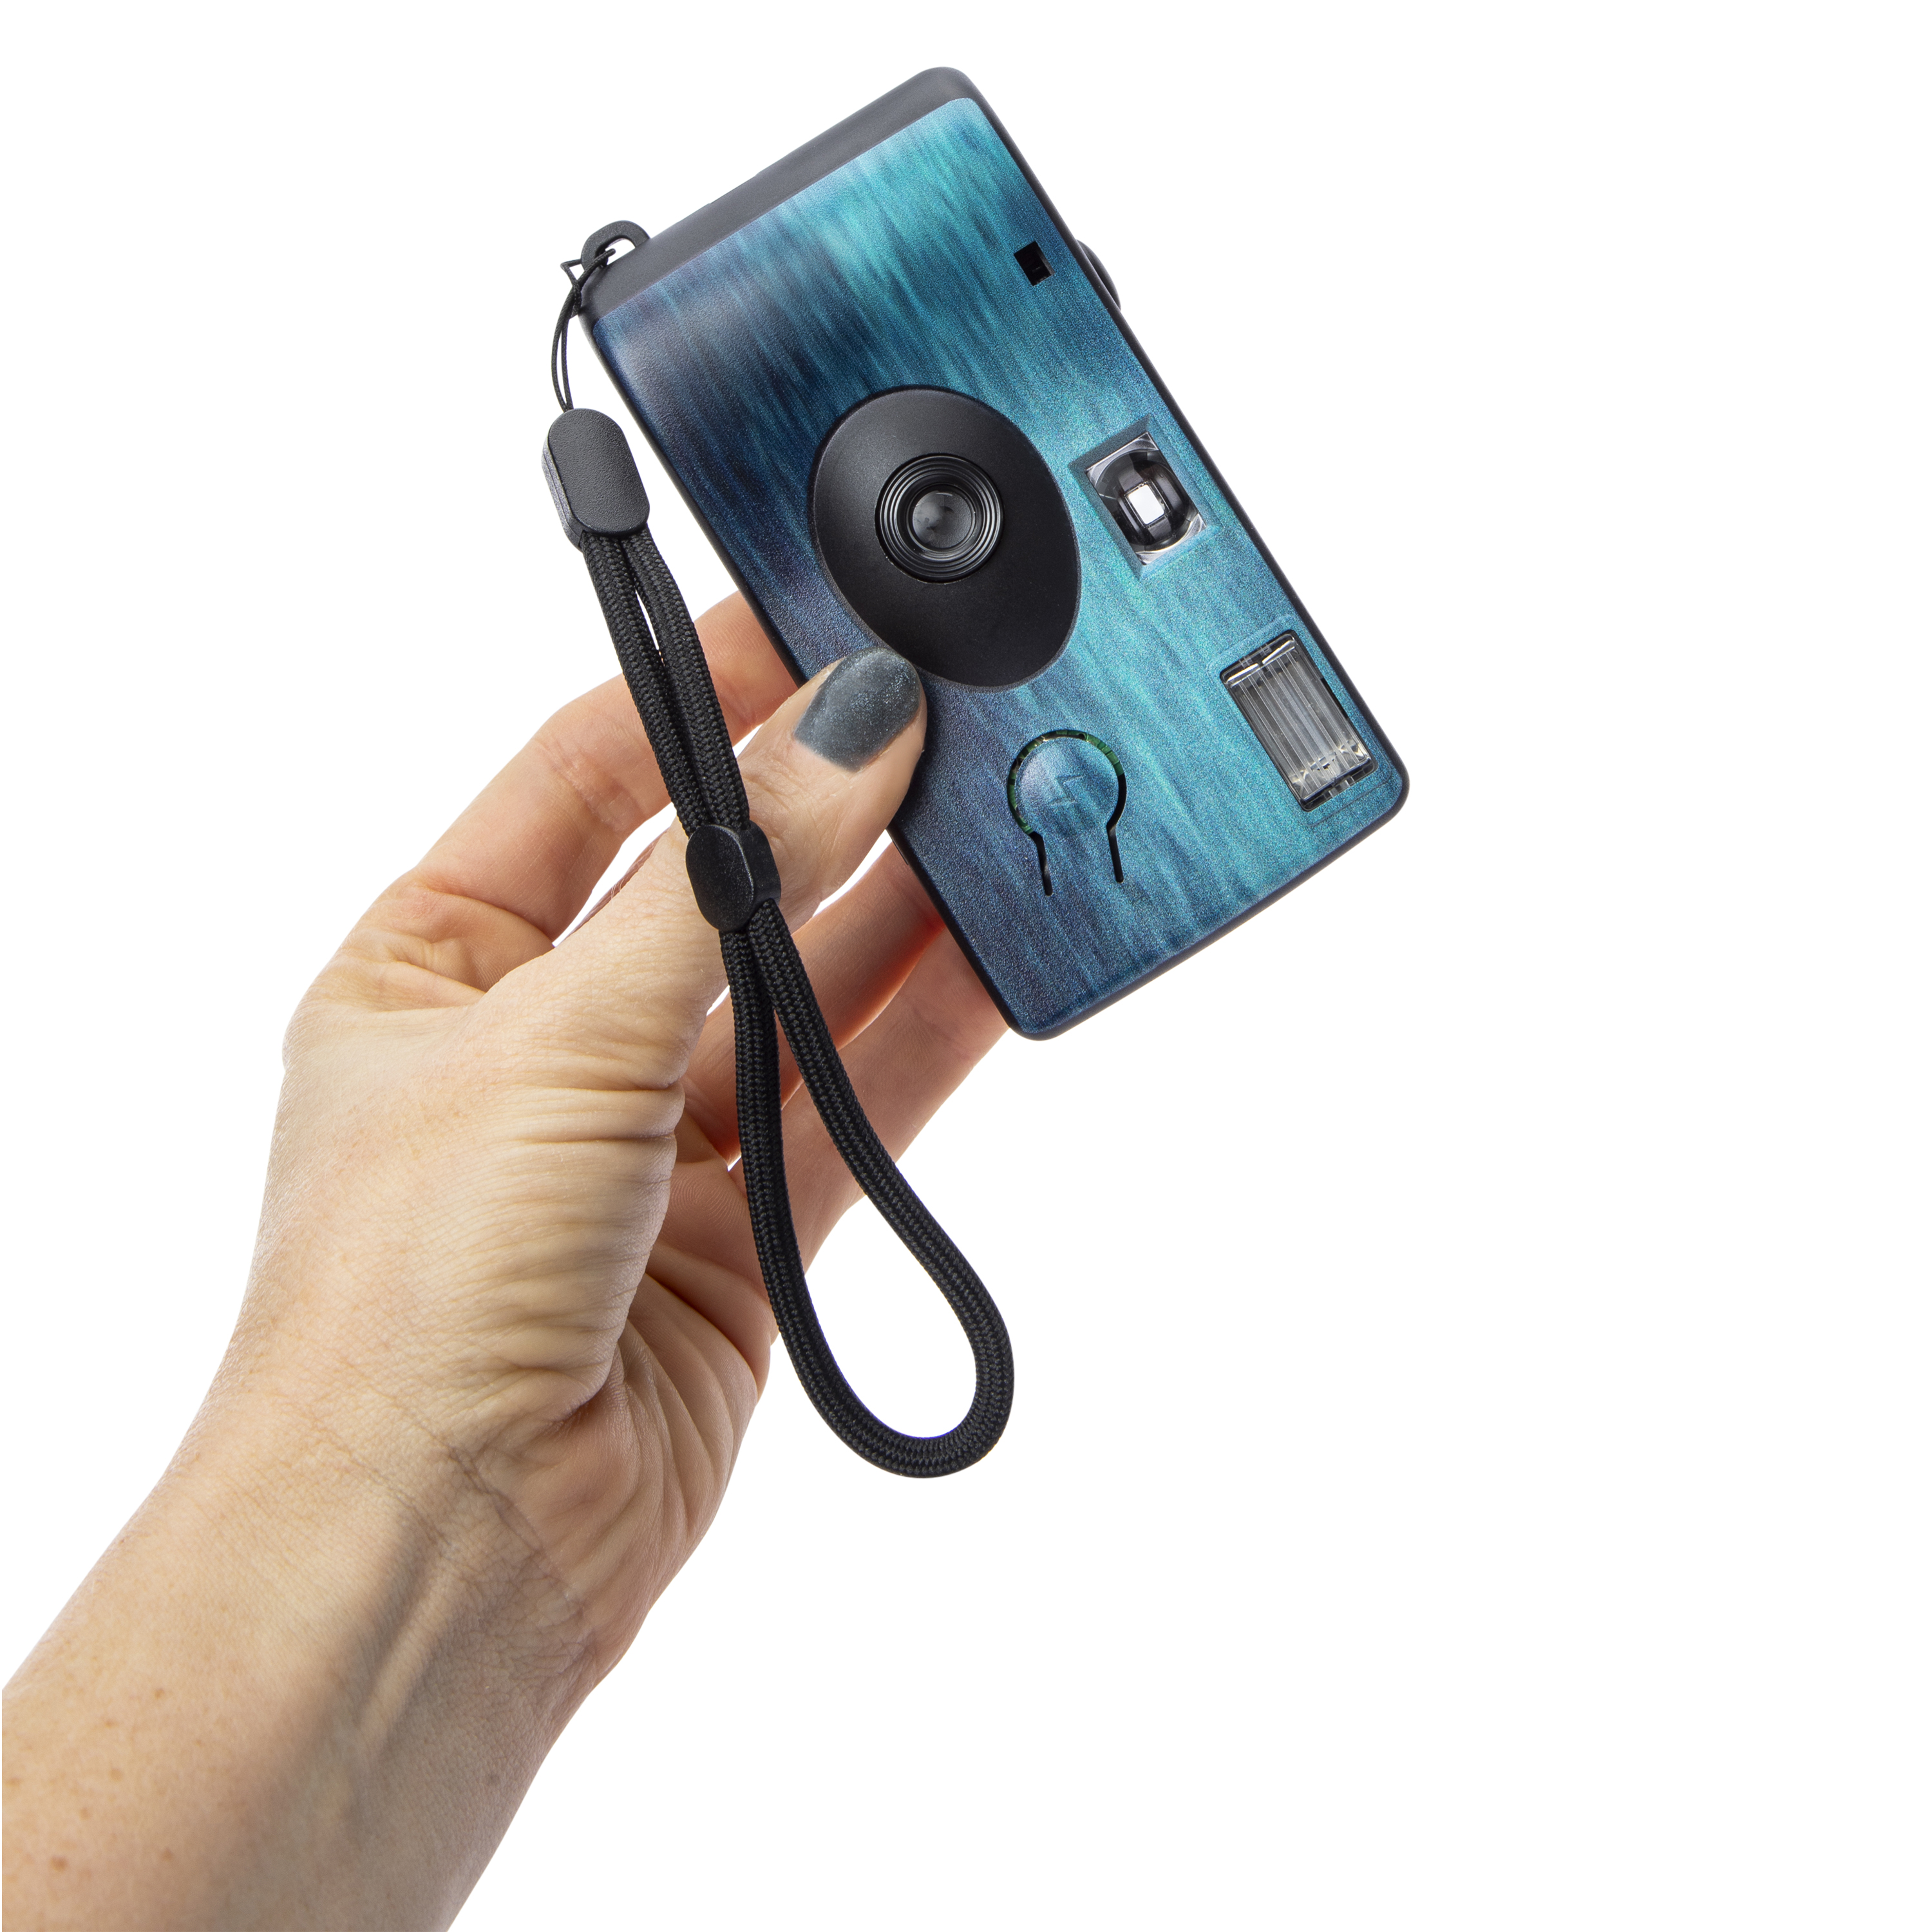 Disposable Film Photo Camera With Flash